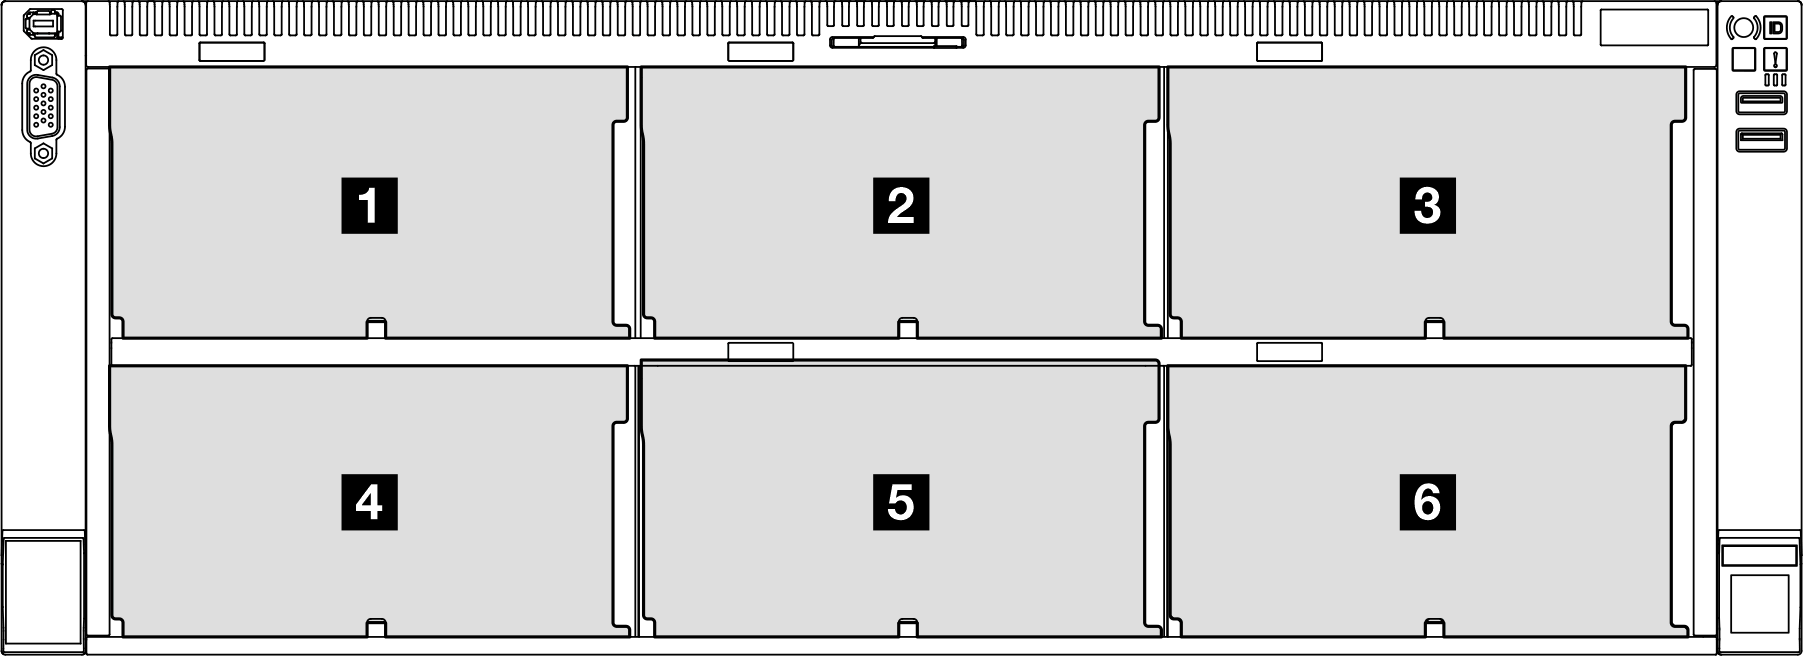 Drive backplane numbering